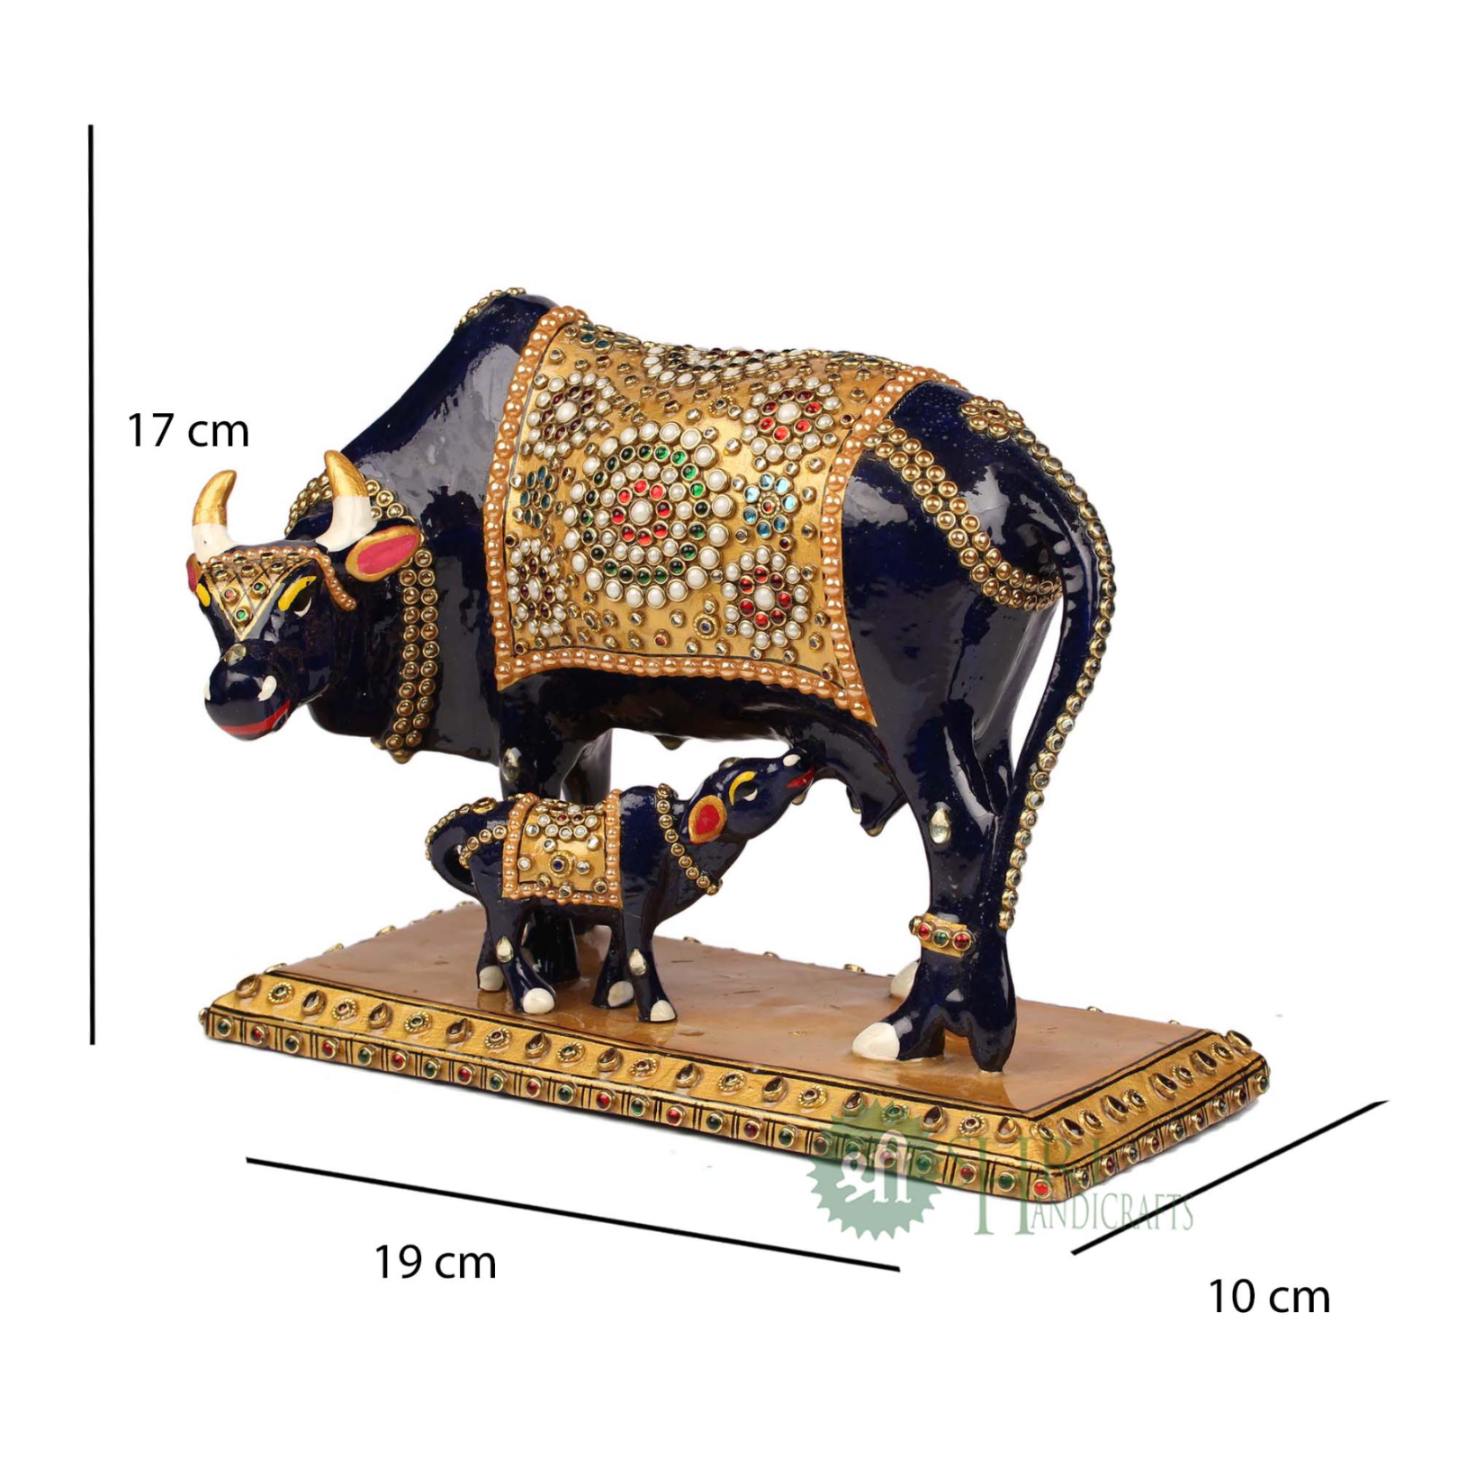 8"COW WITH CALF JWELLERY STONE STATUE MT